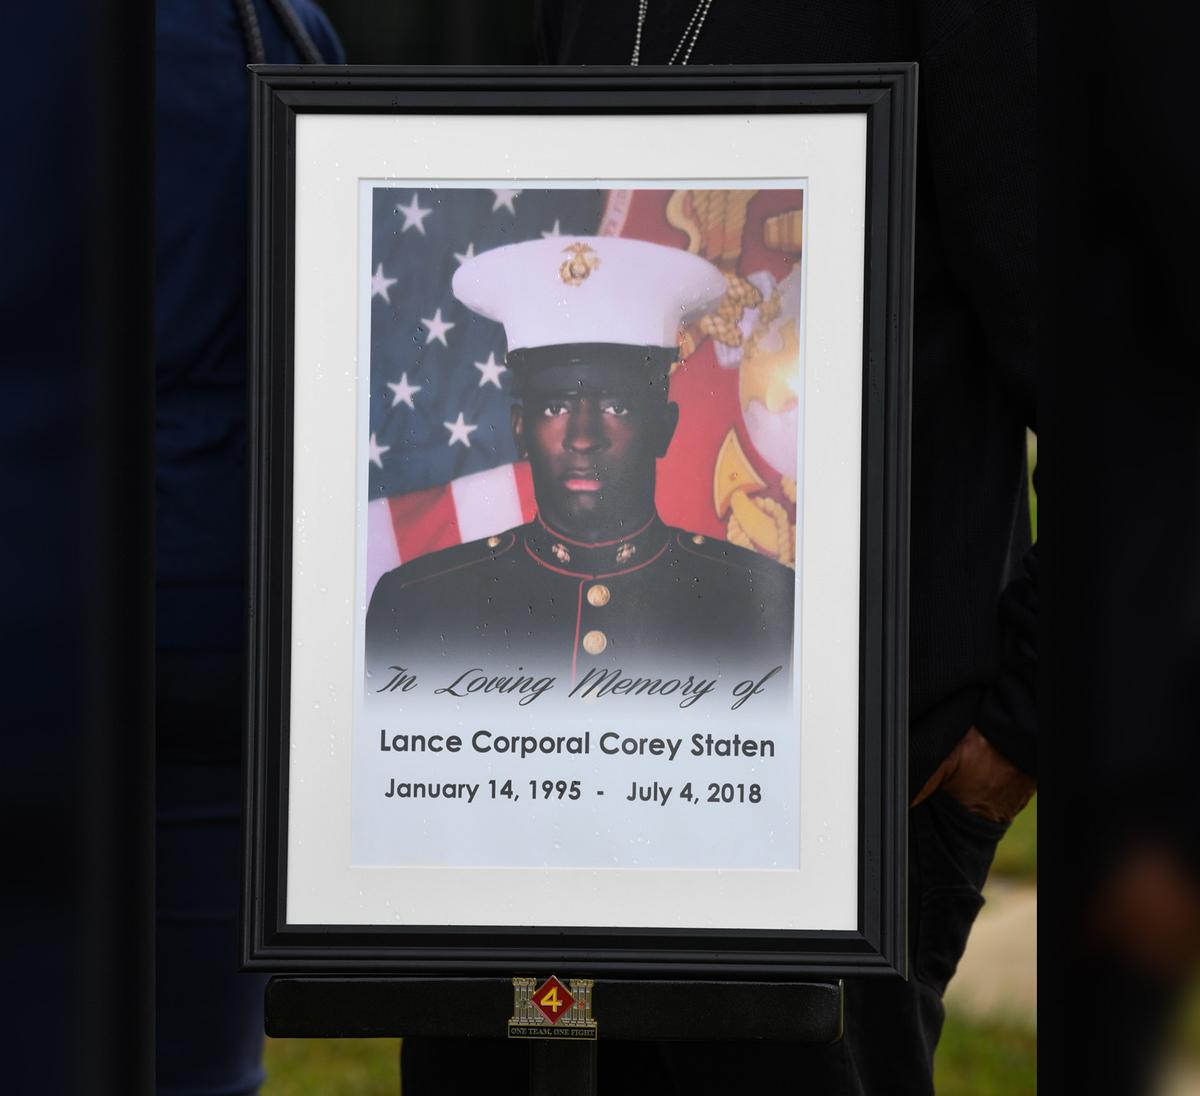 A photo depicting Lance Cpl. Corey Staten is displayed during an Award Ceremony held by 4th Combat Engineering Battalion in Baltimore, Oct. 24, 2020. (<a href="https://www.dvidshub.net/image/6406895/lance-cpl-corey-statens-award-ceremony">Lance Cpl. Dylon Grasso</a>/U.S. Marine Corps)